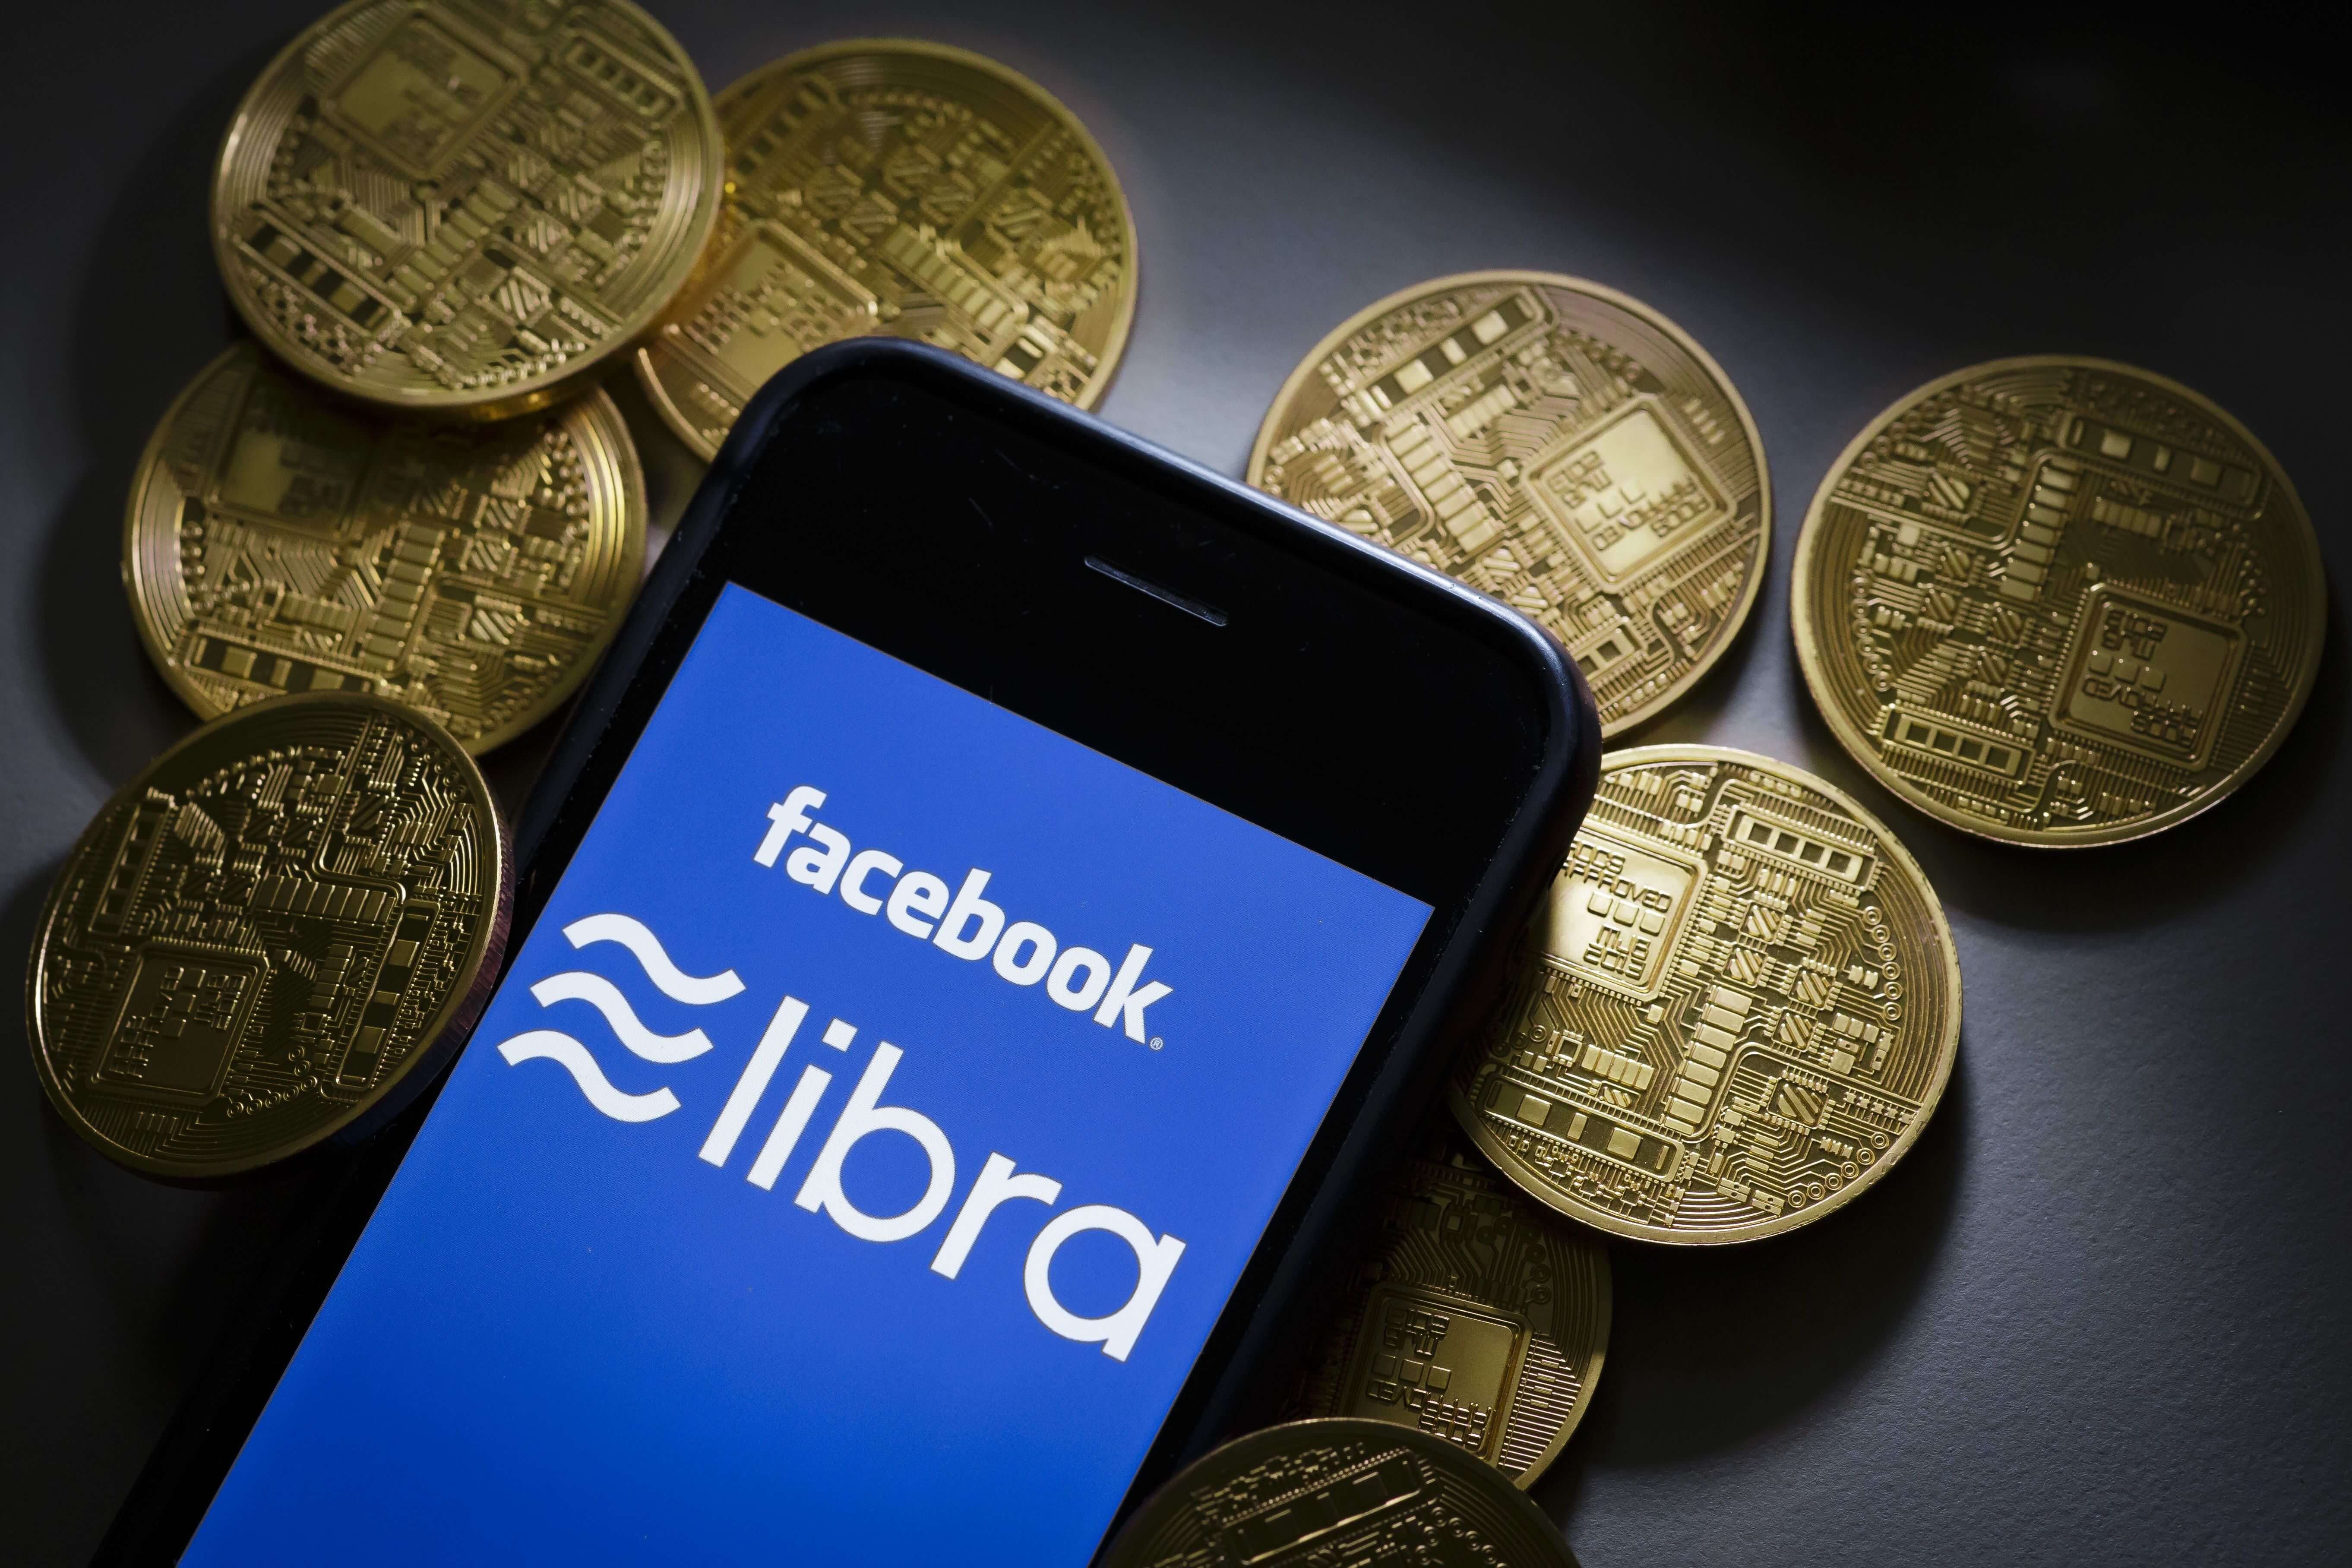 Currency call. Libra (криптовалюта). Либра Facebook. Facebook криптовалюты. Картинка криптовалюта Libra.